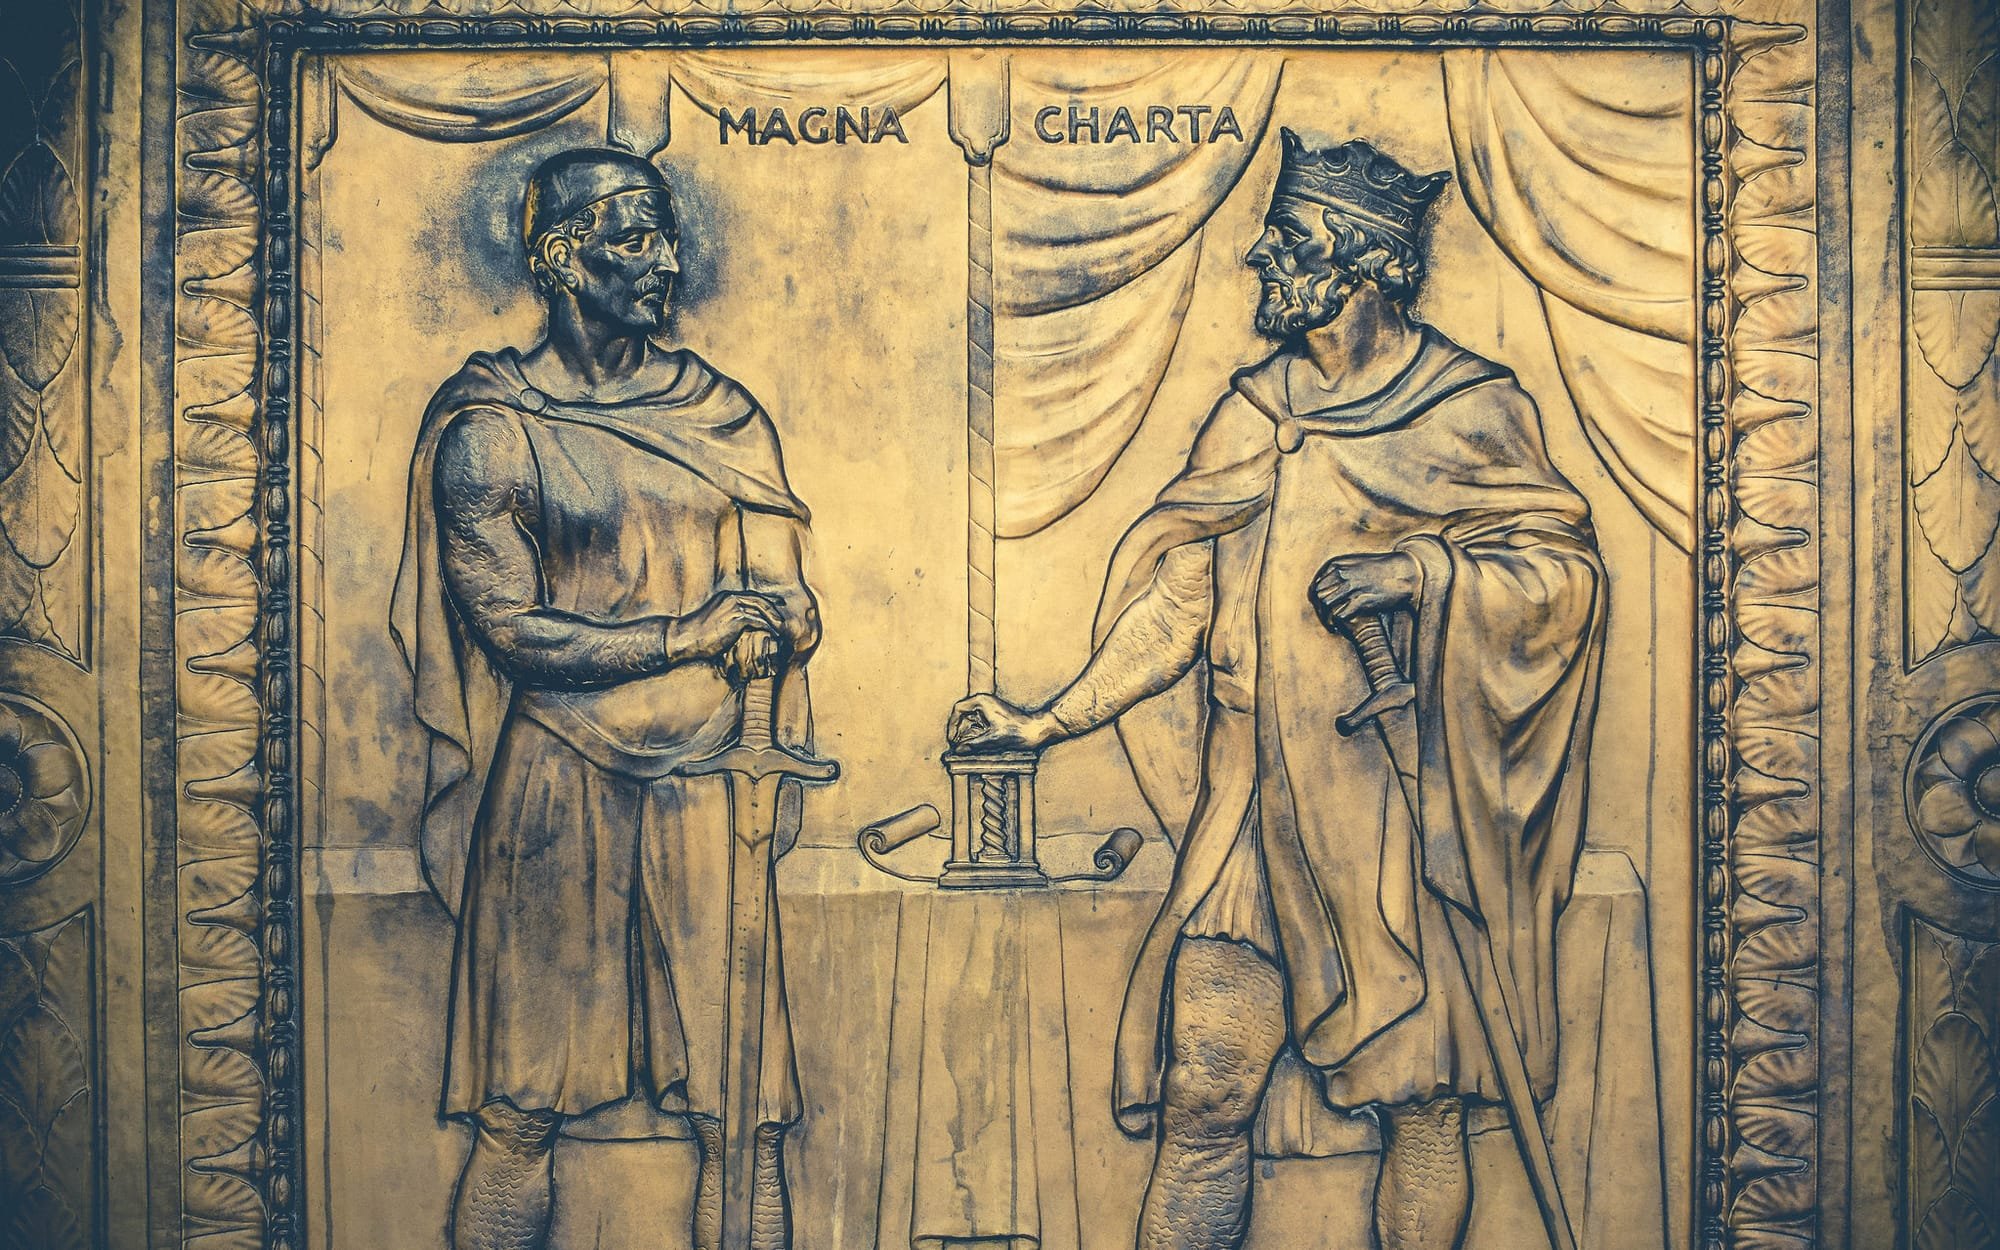 "Magna Carta Relief at the United States Supreme Court" by Matt Popovich is marked with CC0 1.0. To view the terms, visit https://creativecommons.org/publicdomain/zero/1.0/?ref=openverse.